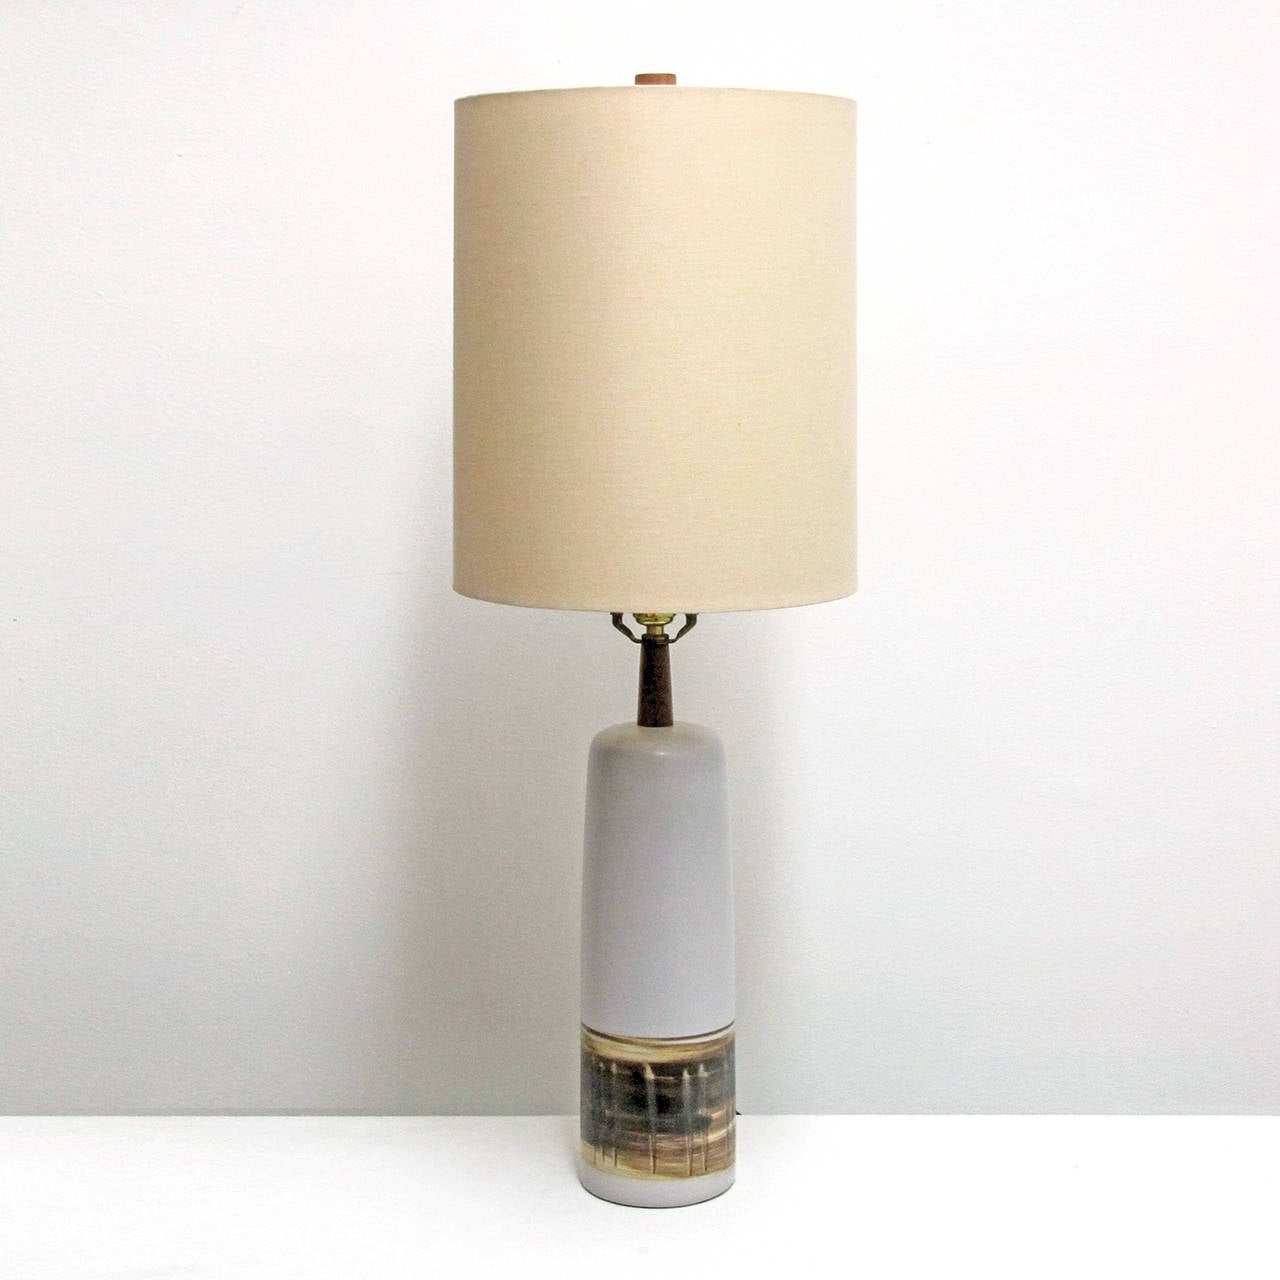 Large-scale soft gray and white satin finish ceramic table lamp by Marshall Studios, broad textured band along the lower third, Gordon Martz's signature details of walnut necks and finial, signed, wired for US standards, one E27 socket, max. wattage